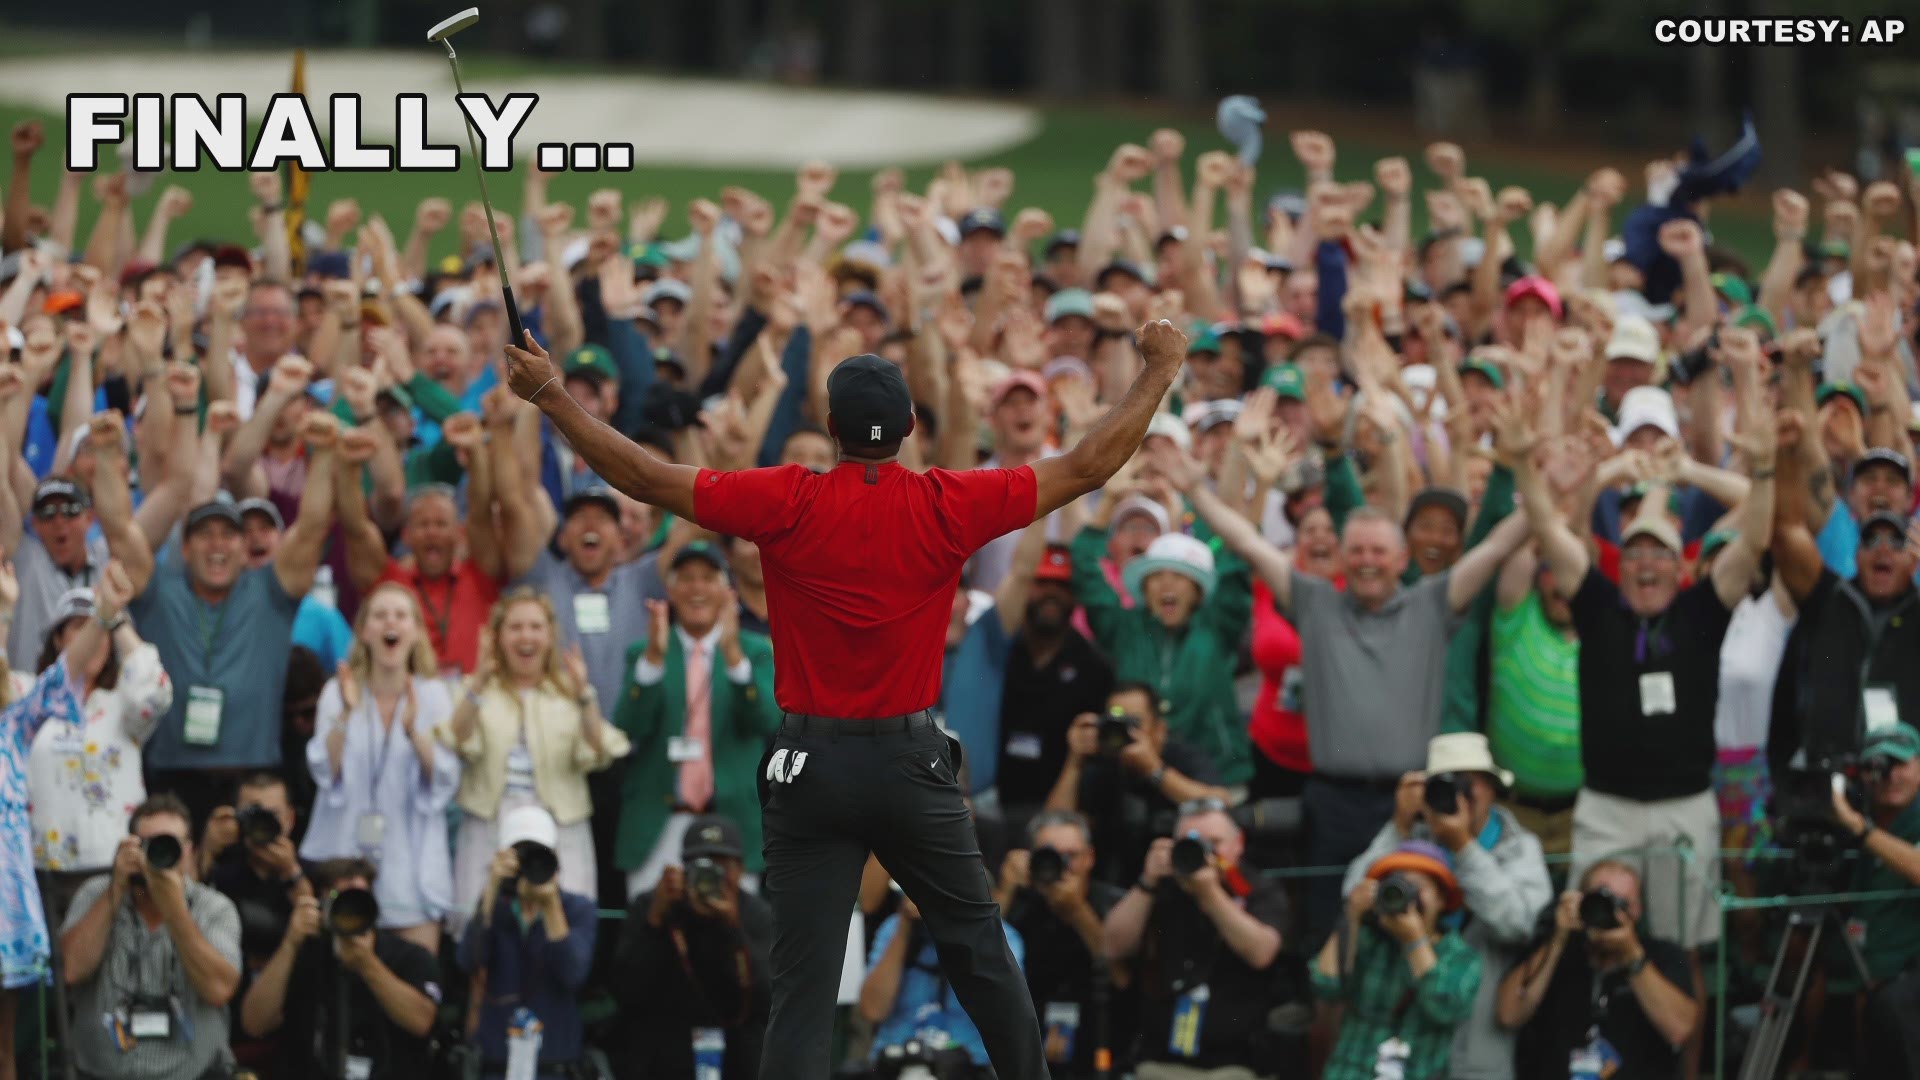 Tiger Woods won his 15th Major championship Sunday by taking the Masters Tournament in Augusta, Georgia.